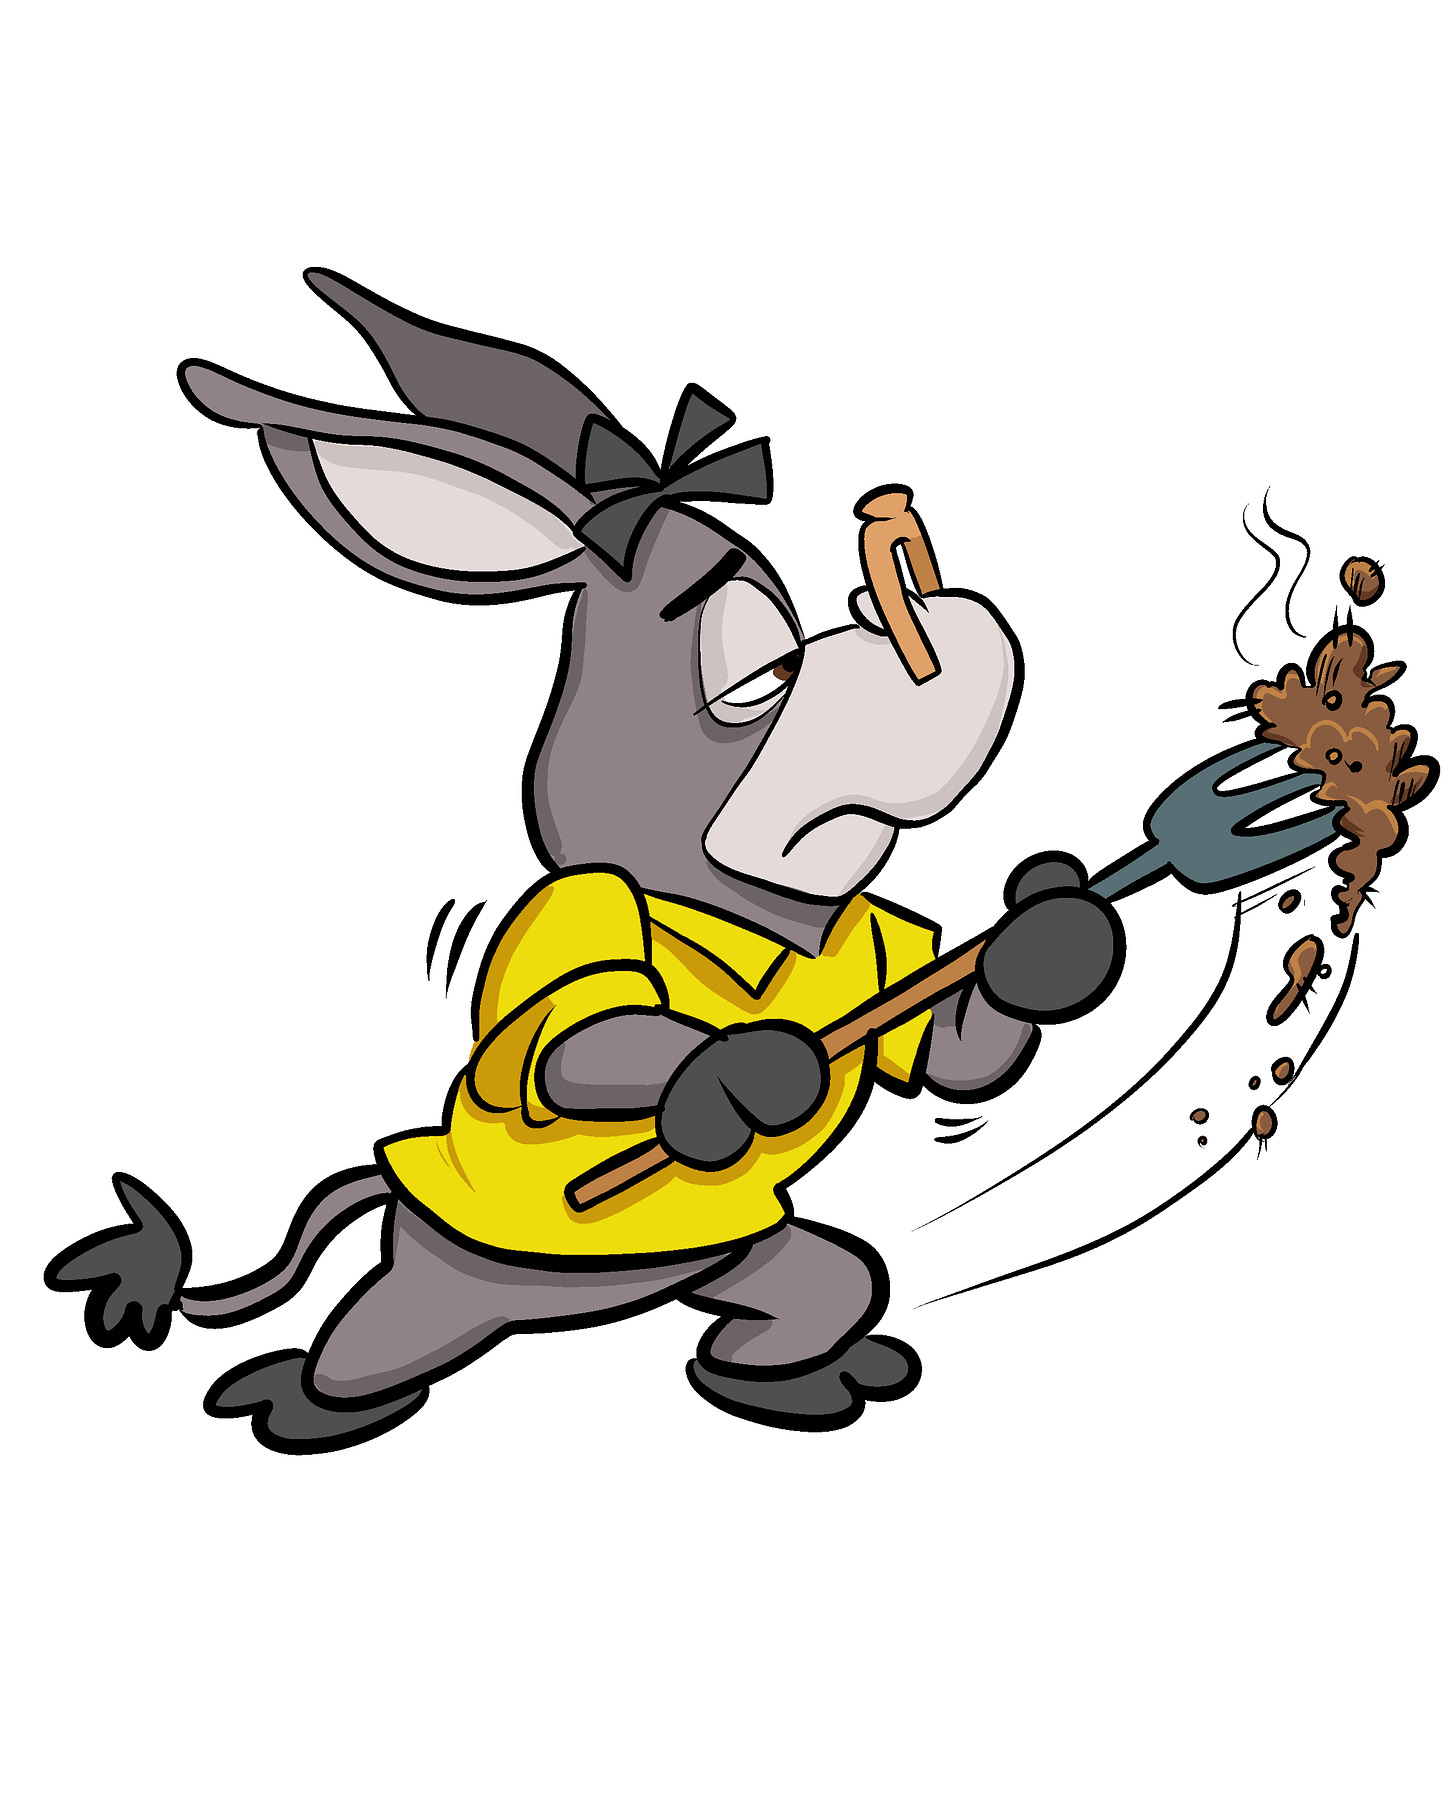 An illustration of Donkey Hoté the Jackass Letters mascot pitching manure.